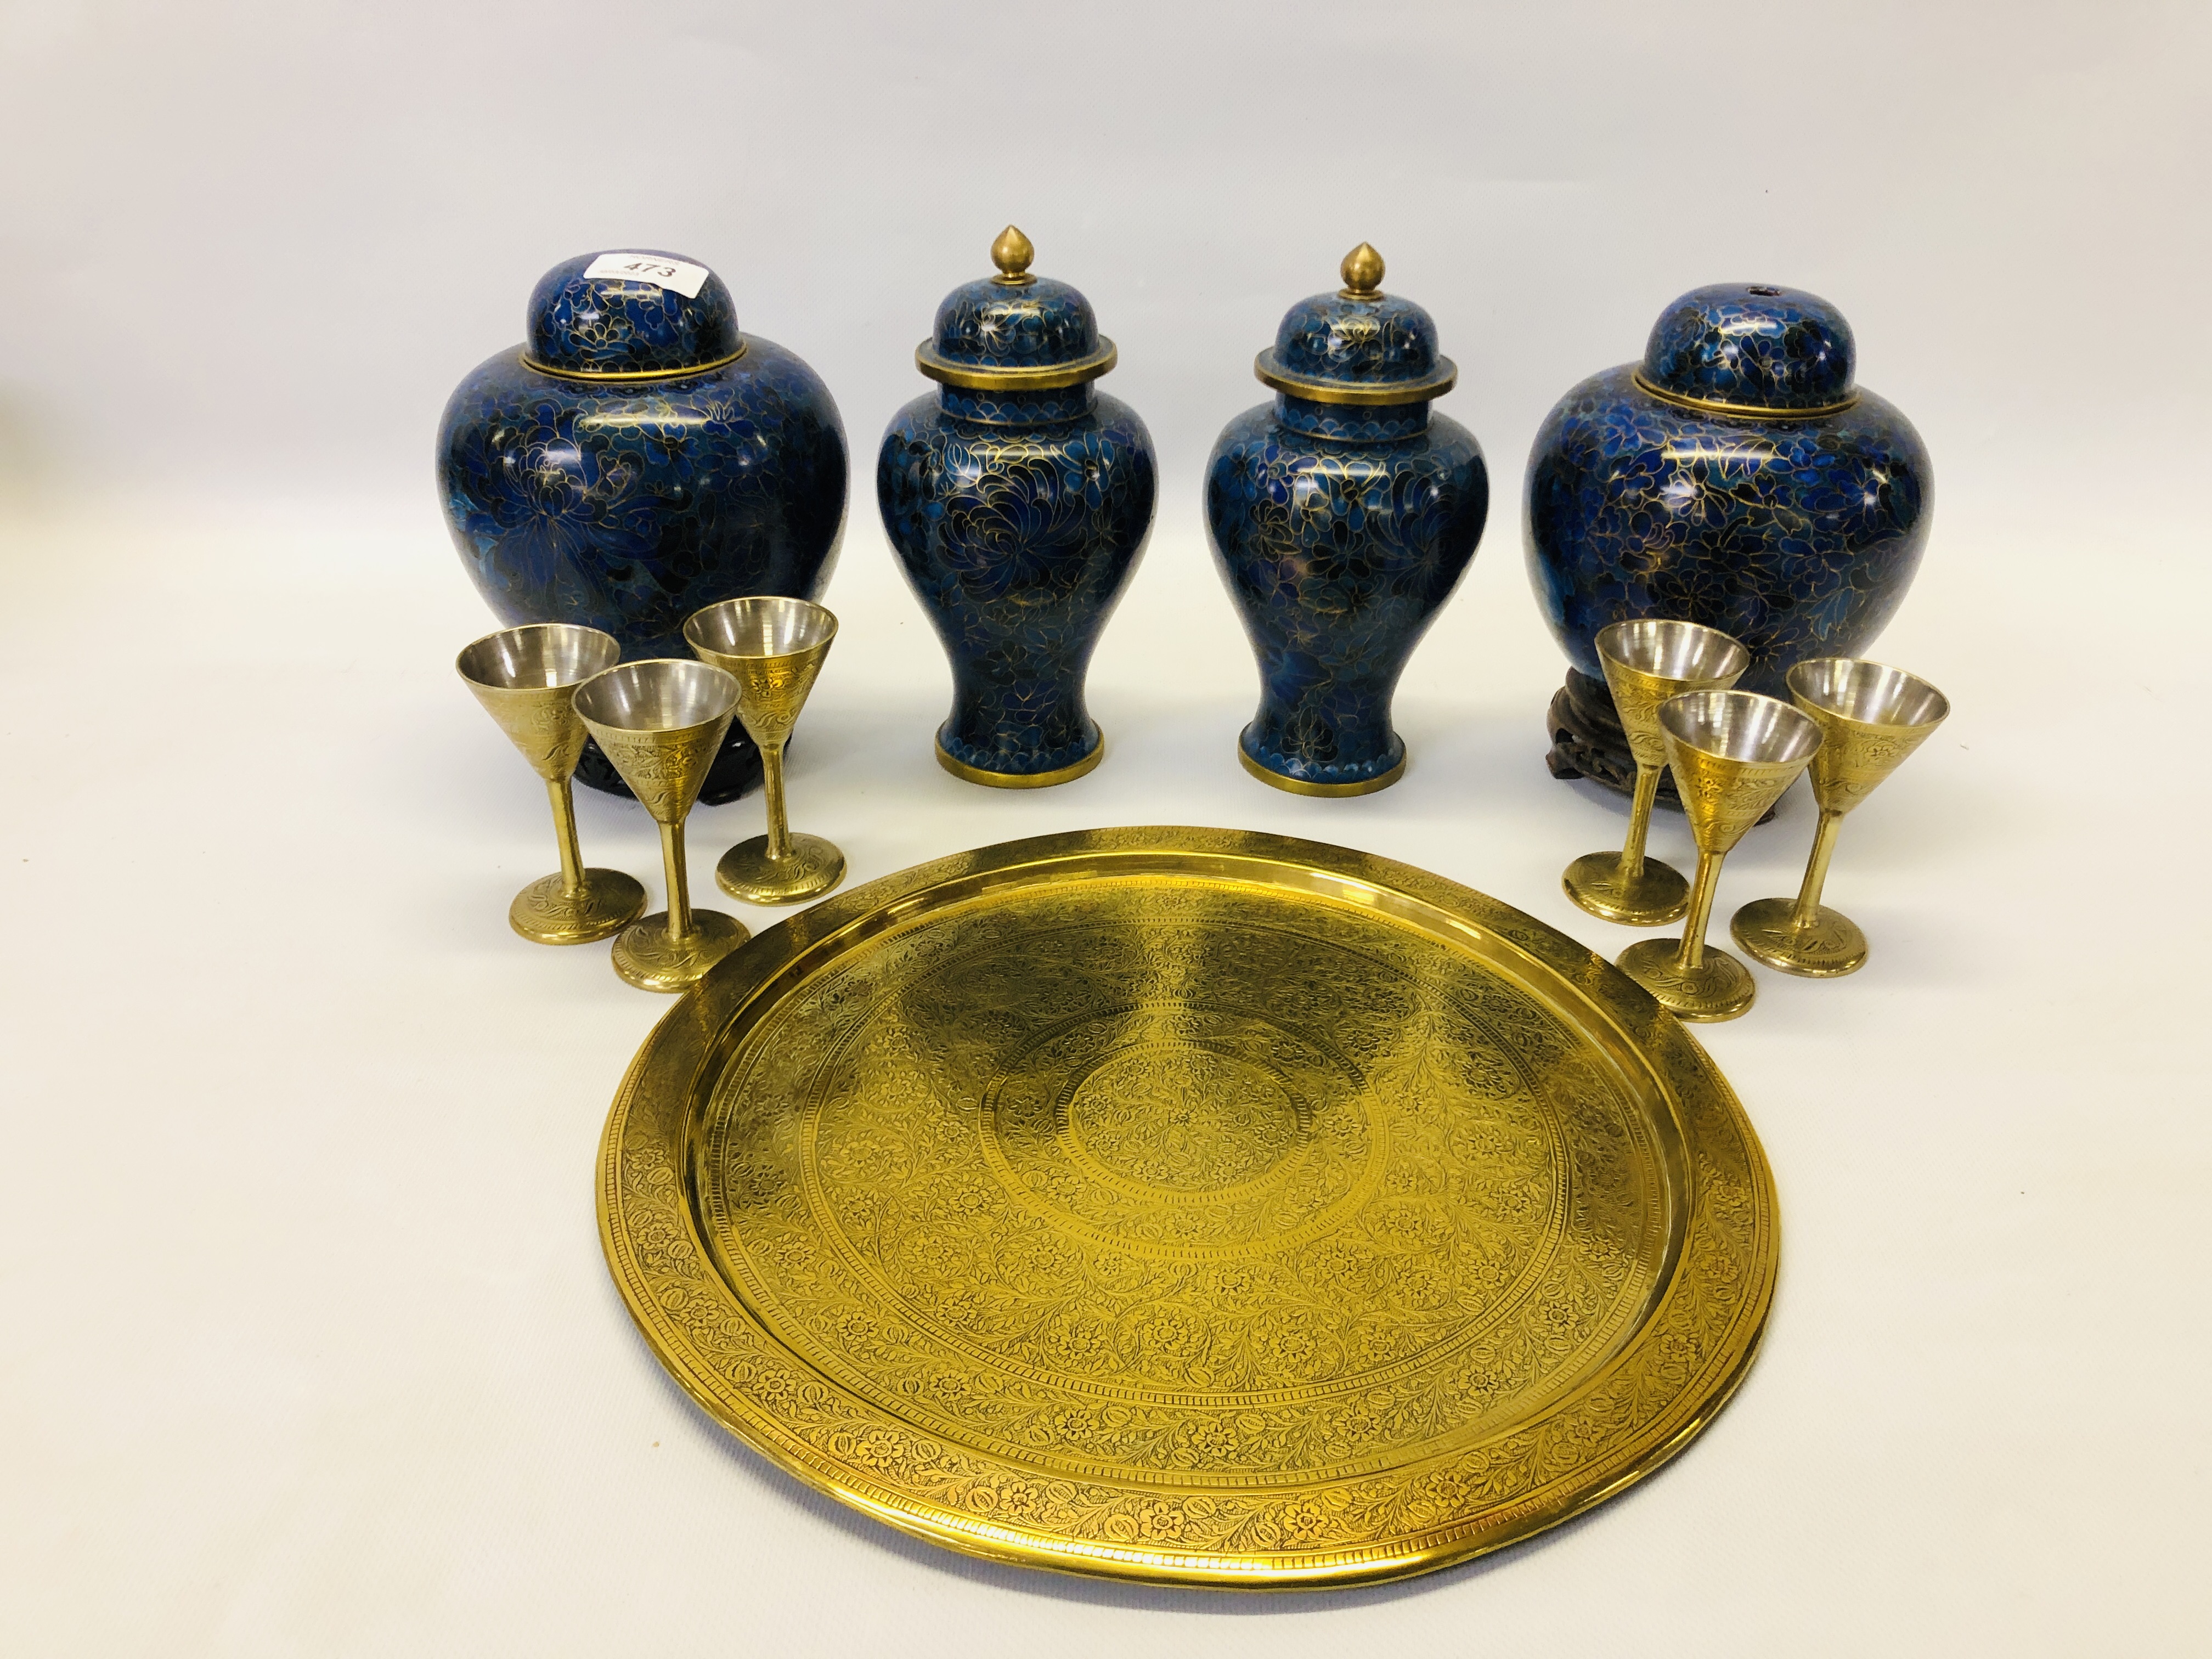 A PAIR OF ORIENTAL BRASS AND BLUE ENAMELLED CLOISONNE COVERED URNS H 20CM AND A PAIR OF MATCHING